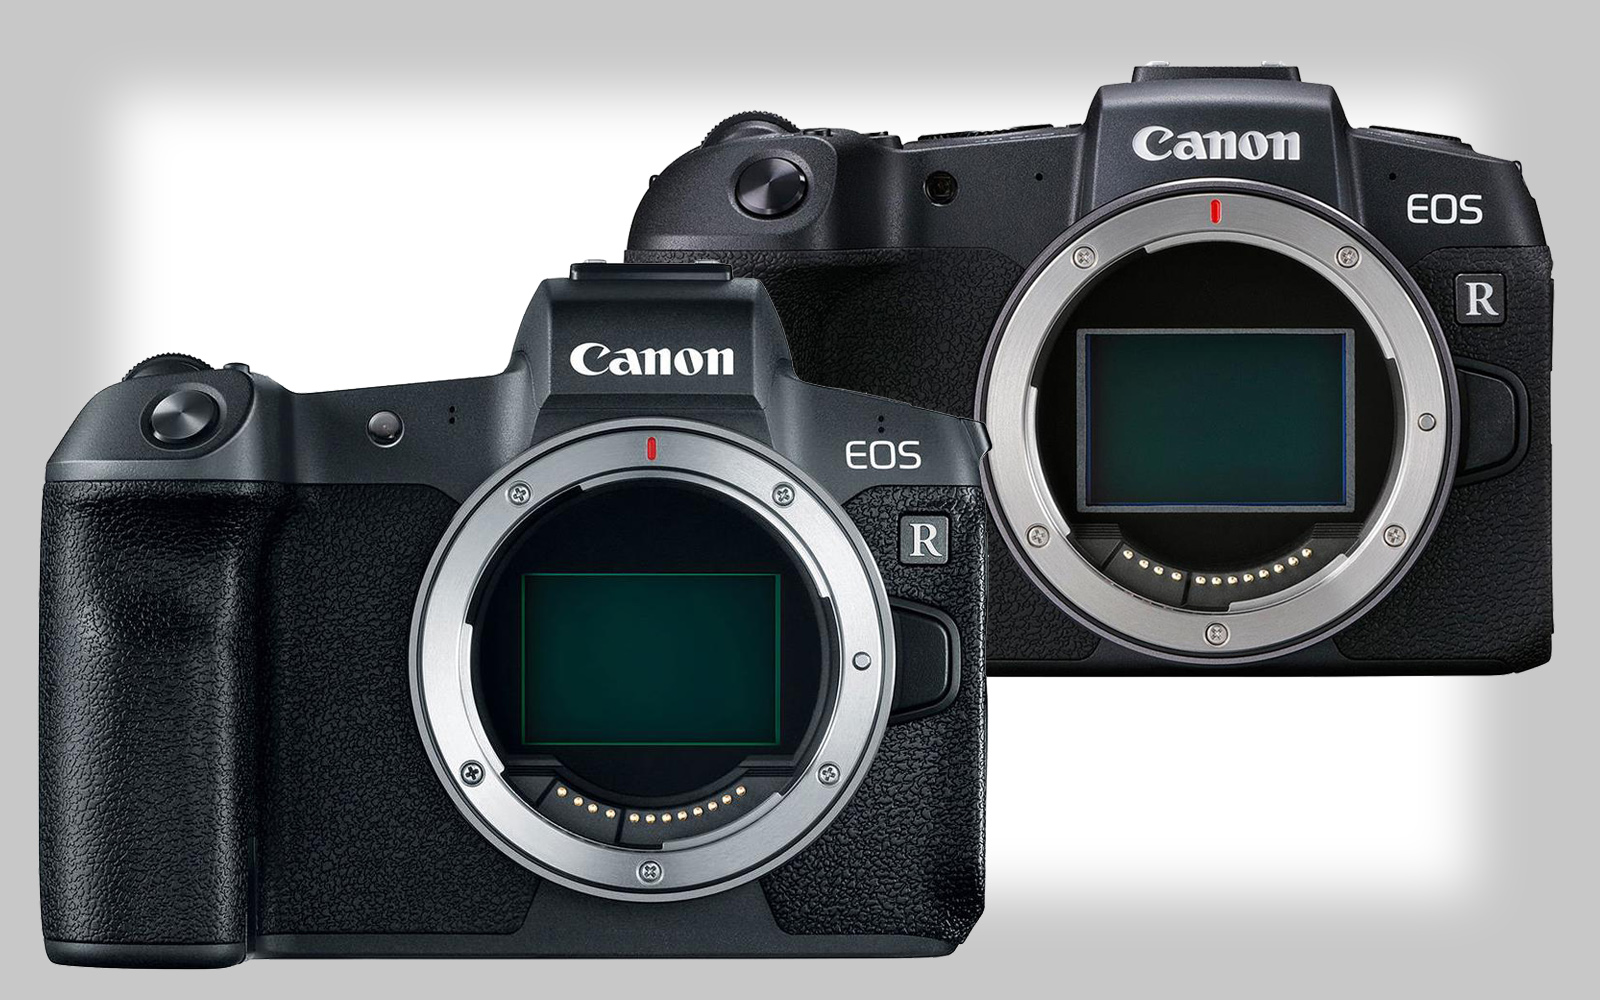 Canon S Q2 2019 Financial Report Shows Steep Decline In Camera Sales